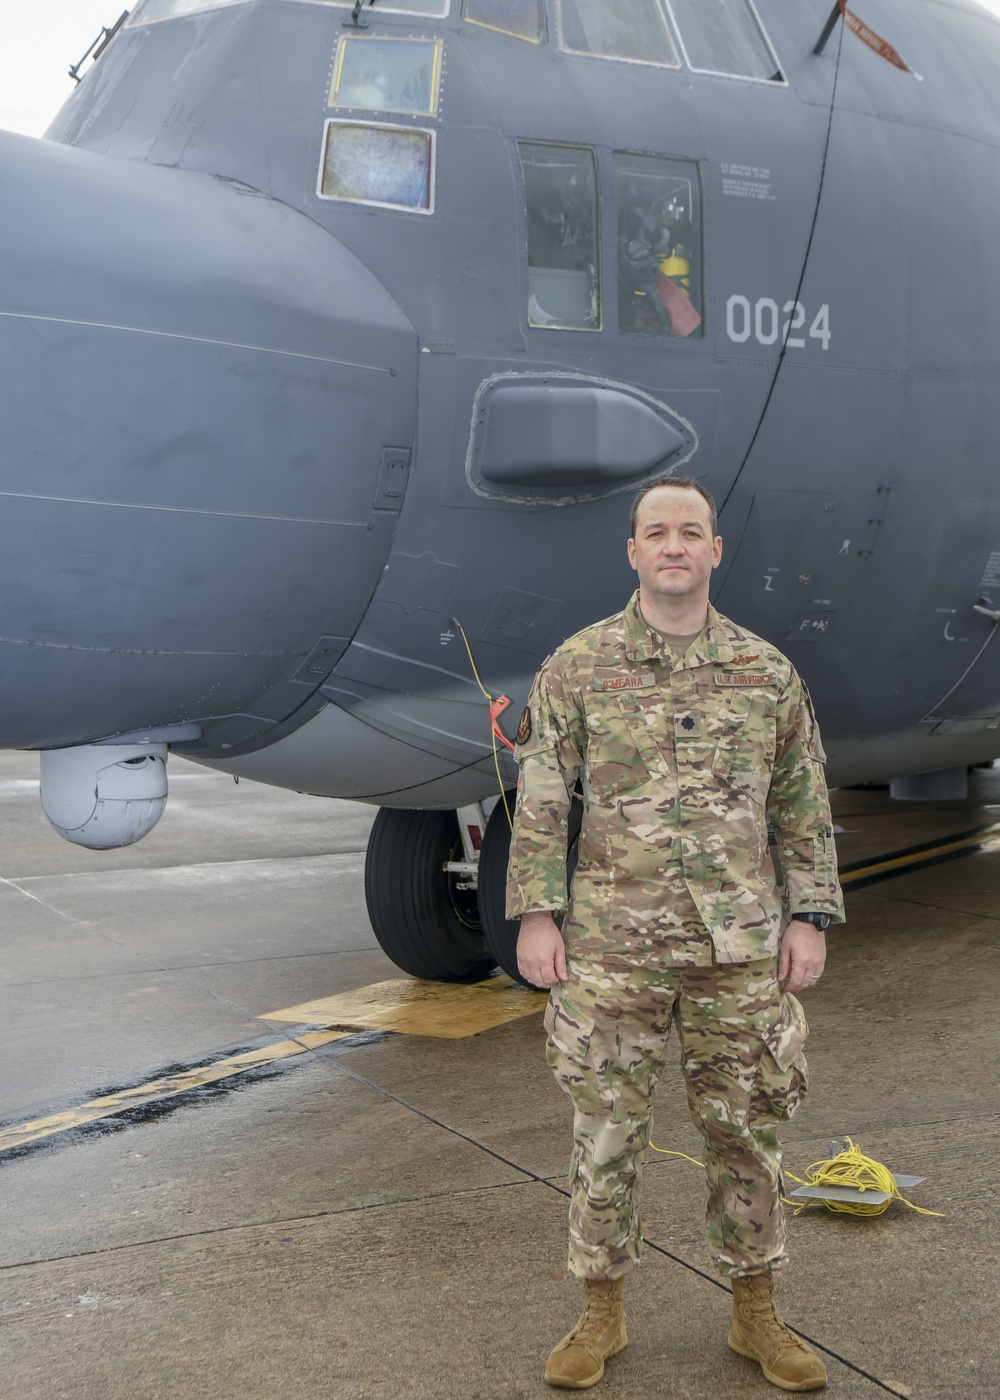 Lt. Col. O’Meara takes command of the 15th Special Operations Squadron